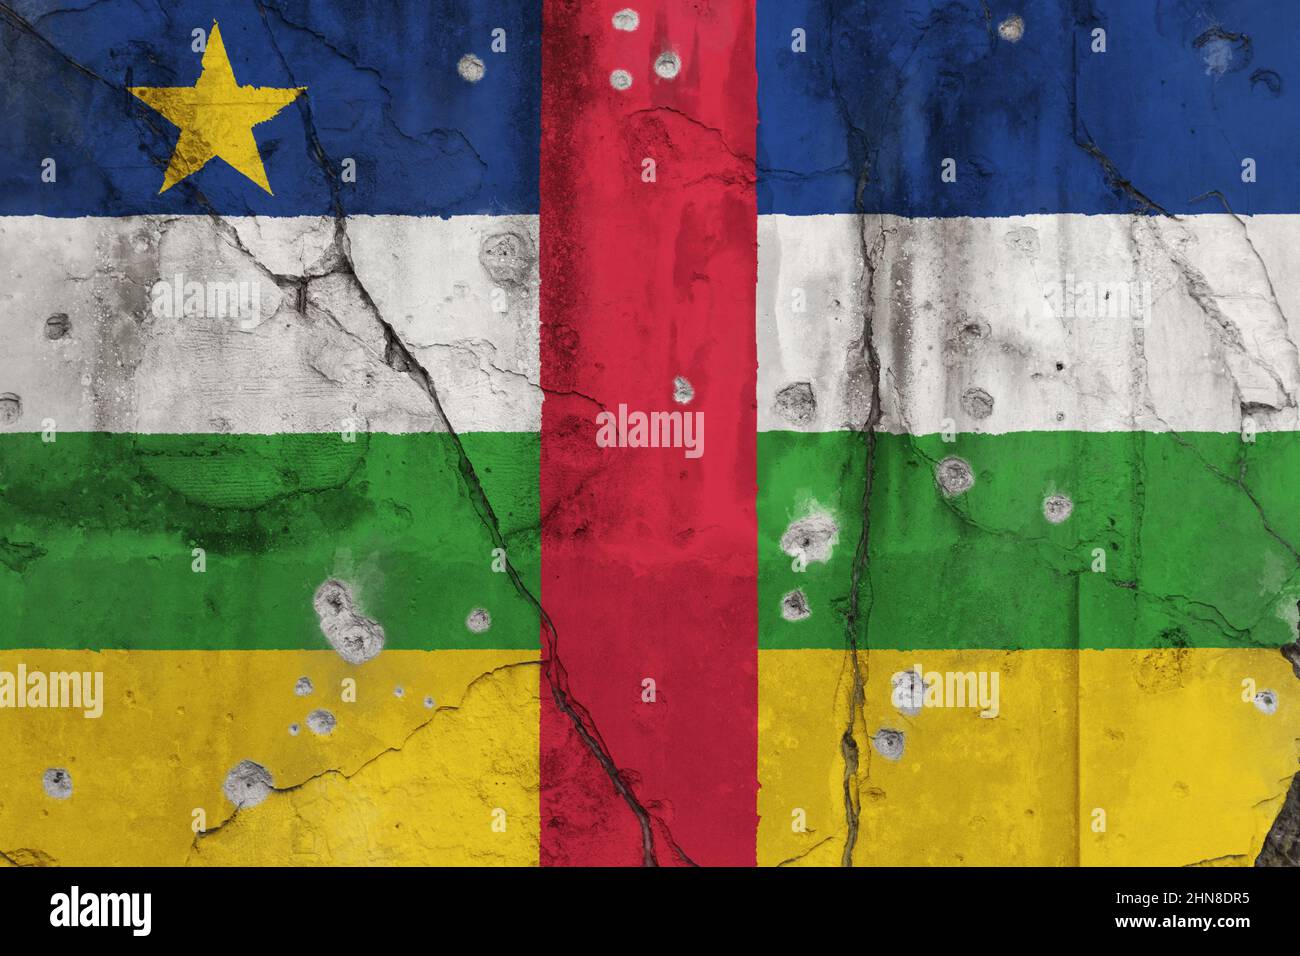 Weathered flag of Central African Republic (CAR) painted on a cracked wall with bullet holes. Central African Republic violence and crisis concept. Stock Photo